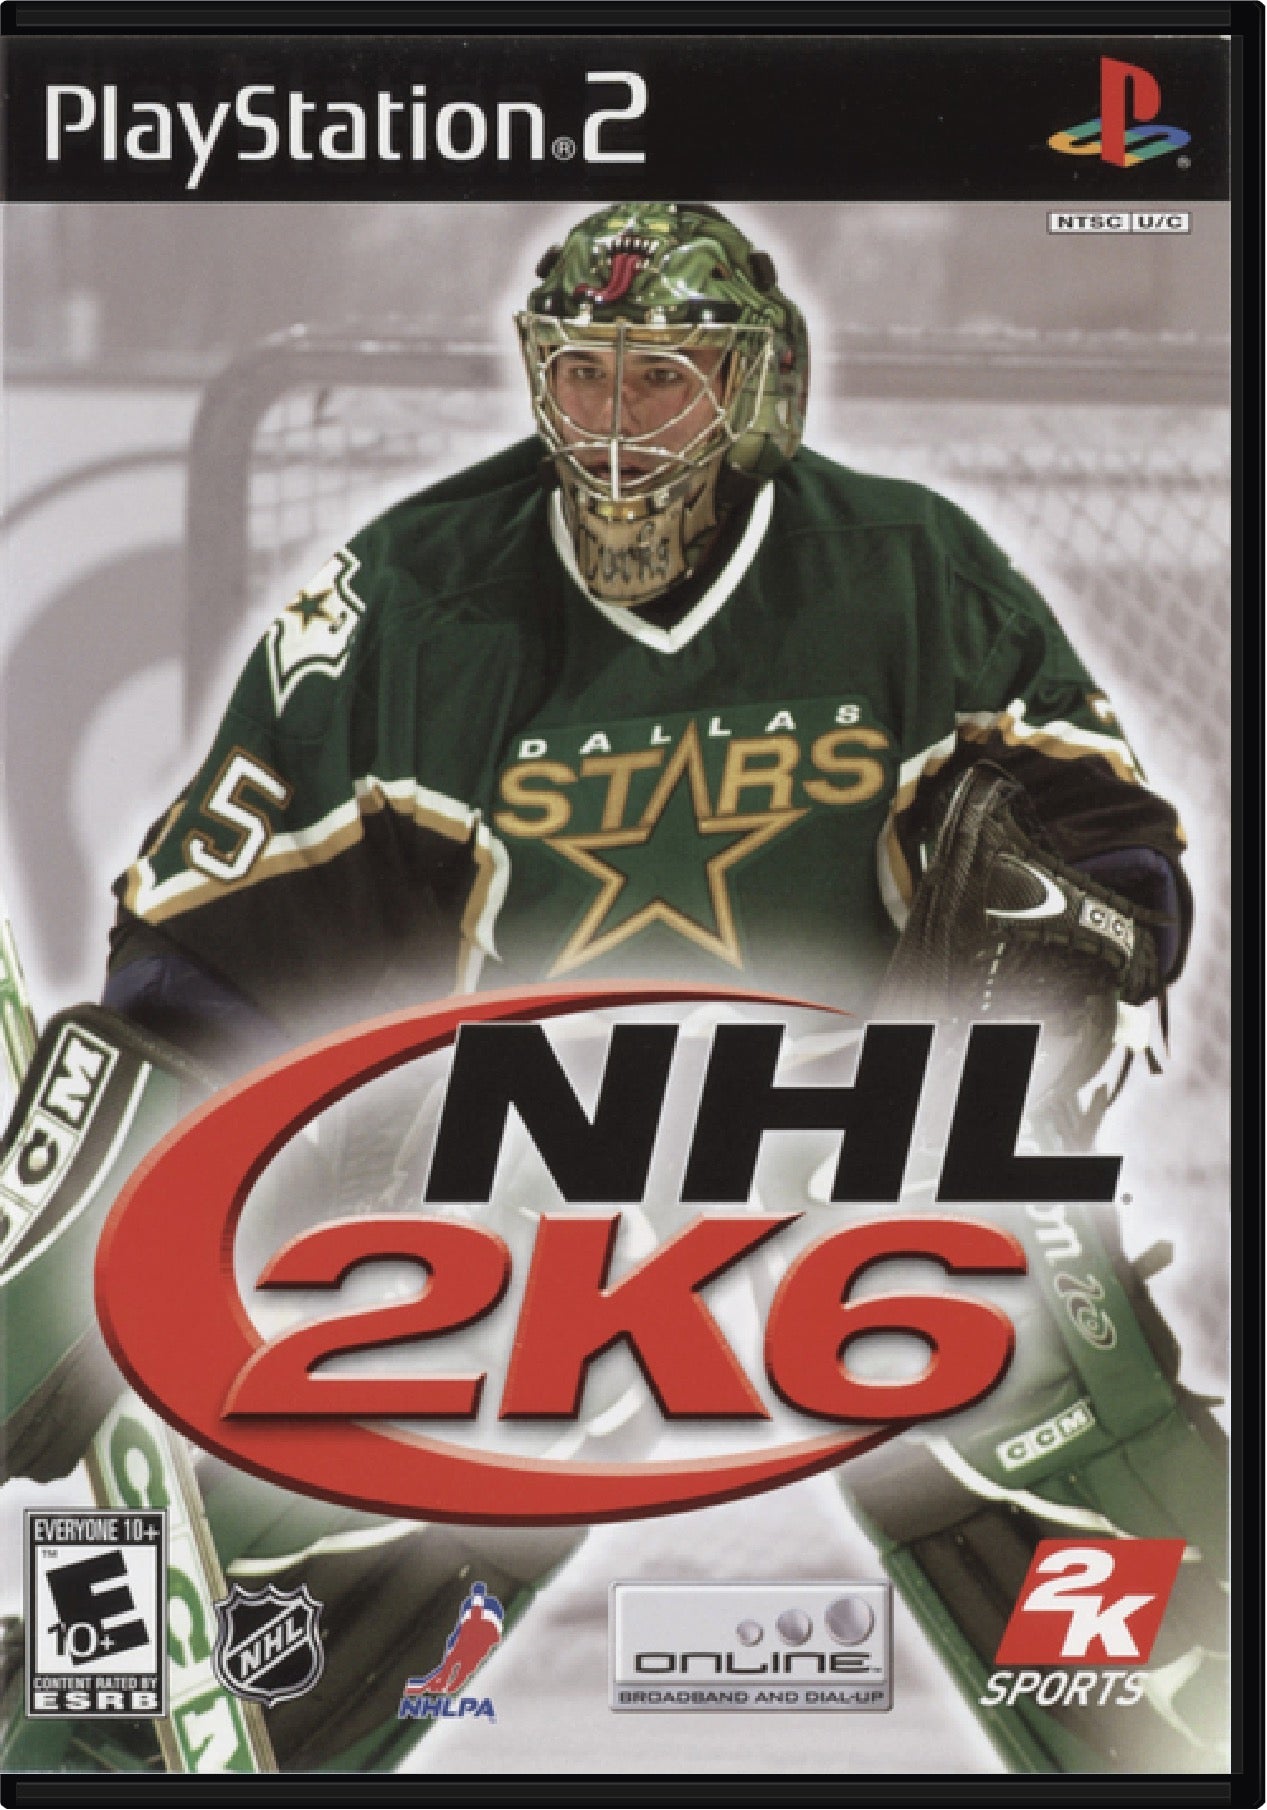 NHL 2K6 Cover Art and Product Photo